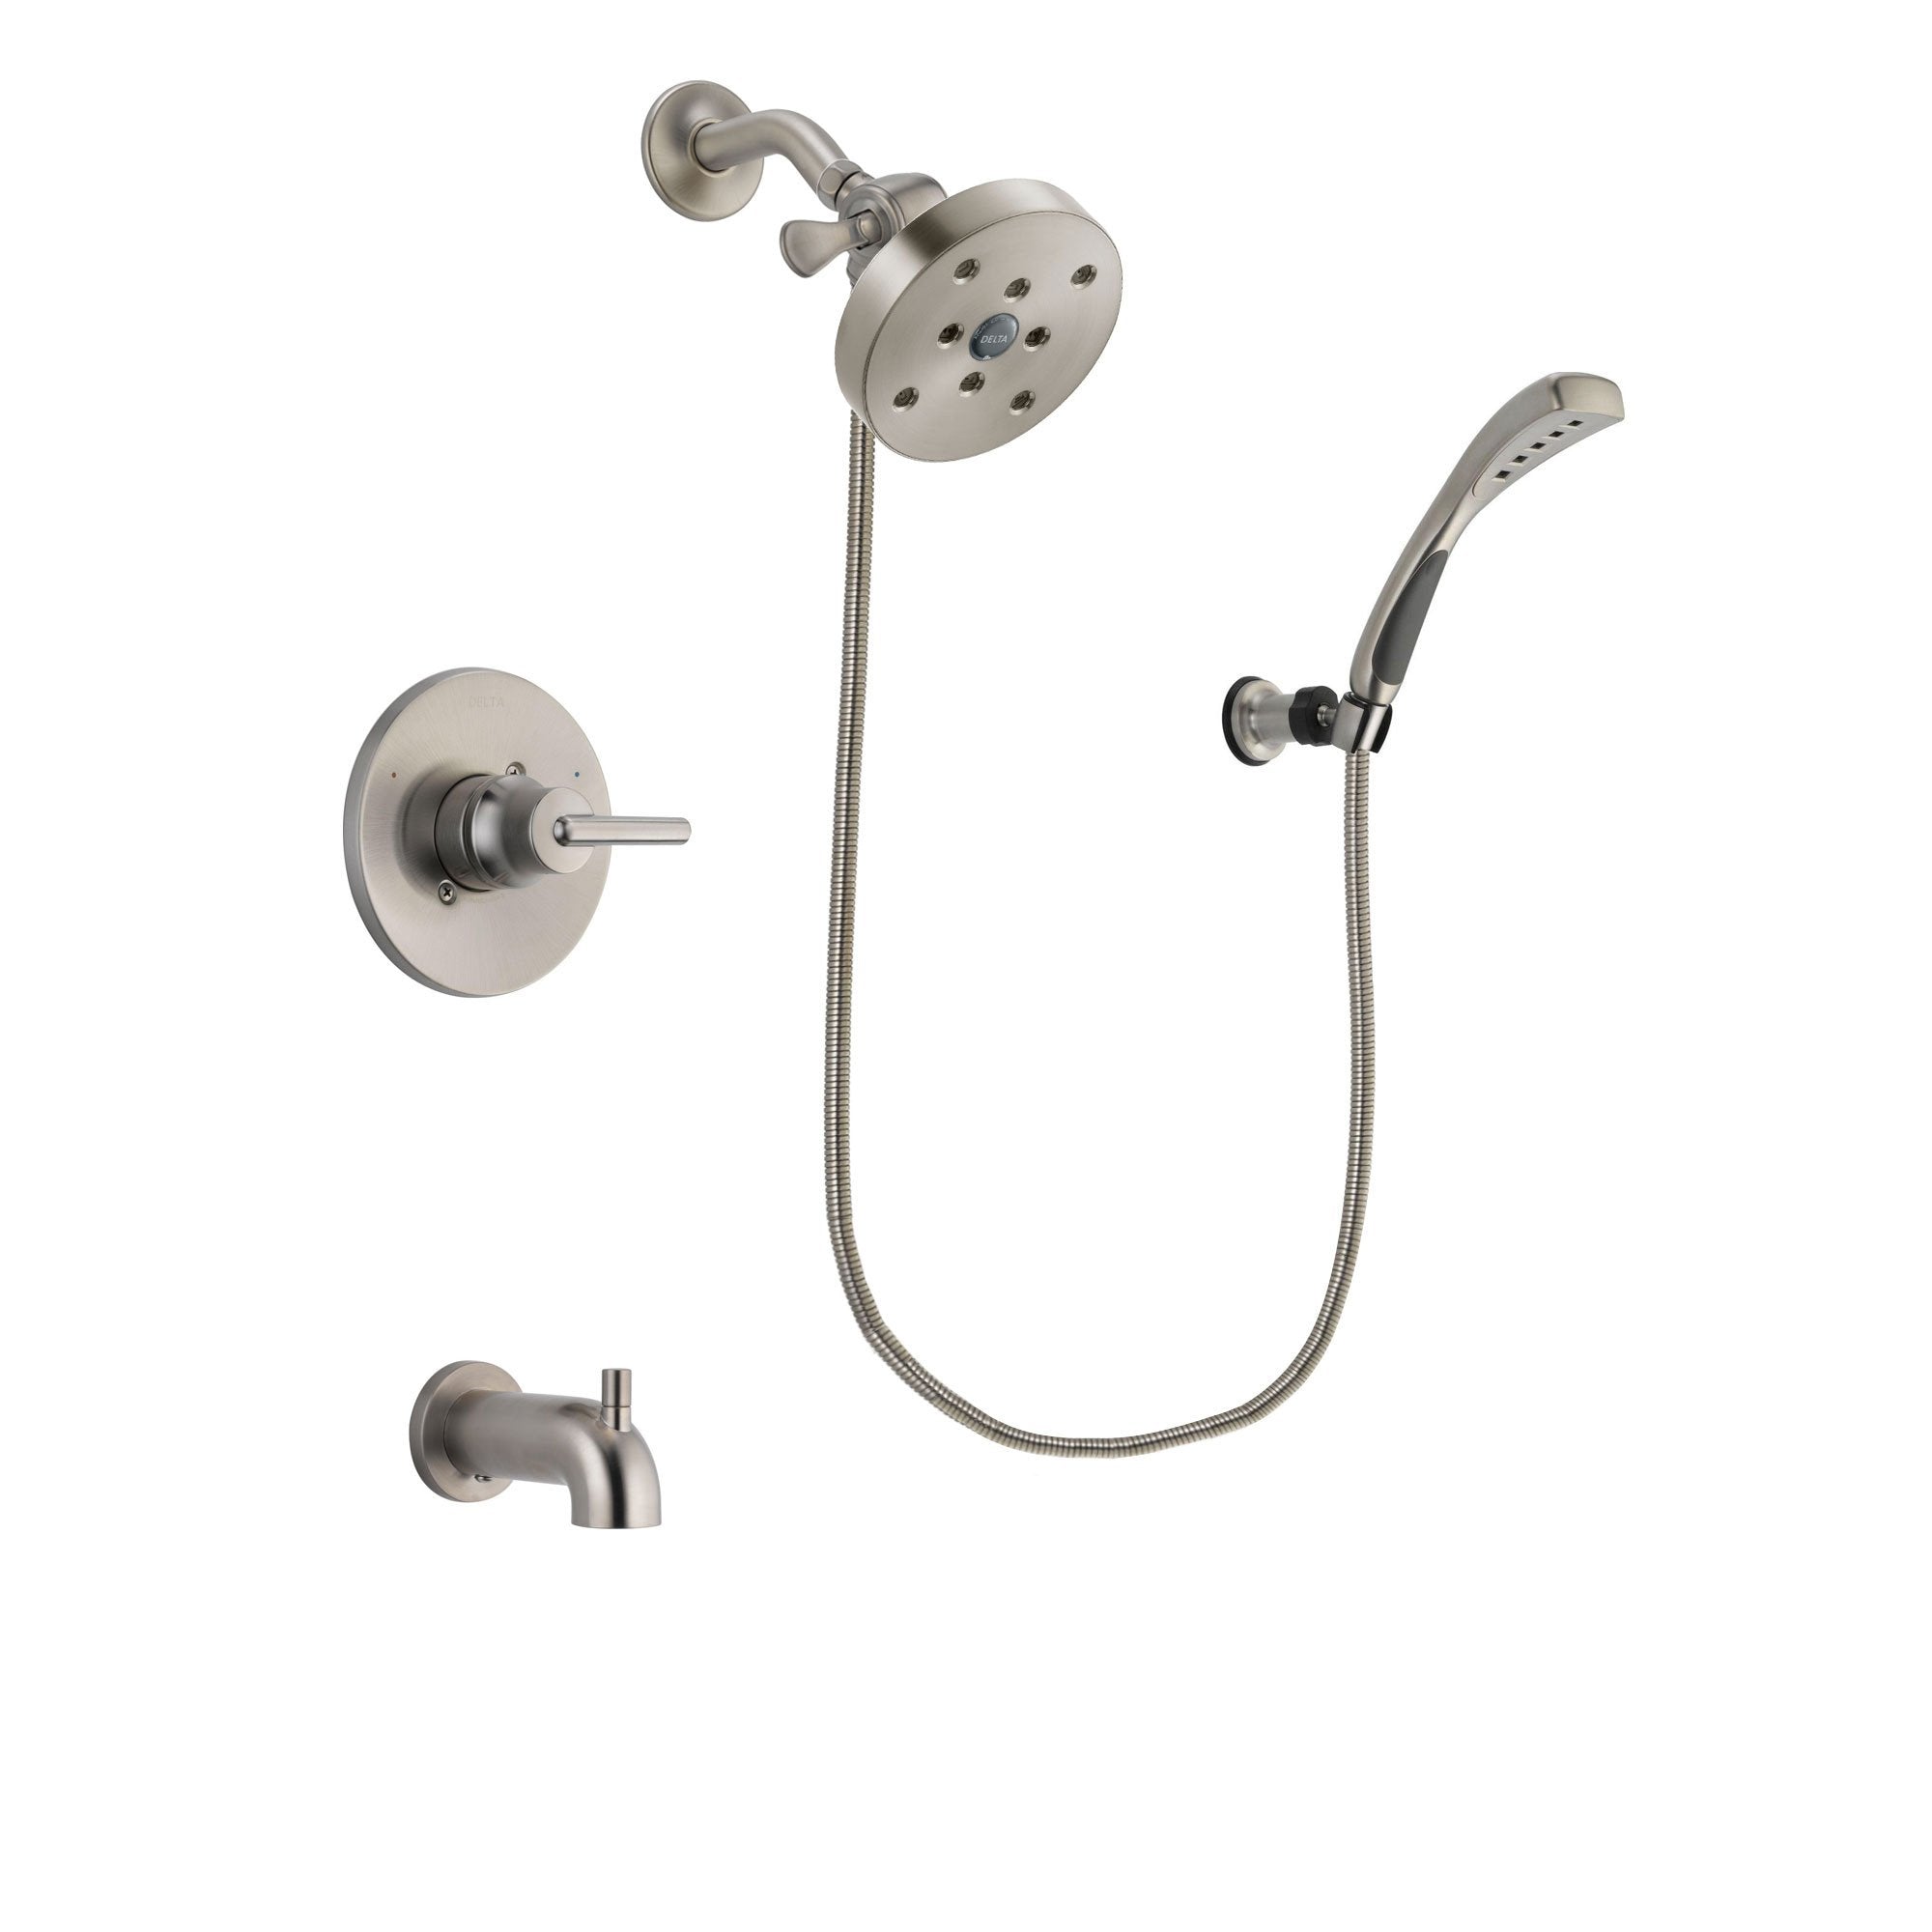 Delta Trinsic Stainless Steel Finish Tub and Shower Faucet System Package with 5-1/2 inch Shower Head and Wall Mounted Handshower Includes Rough-in Valve and Tub Spout DSP1899V